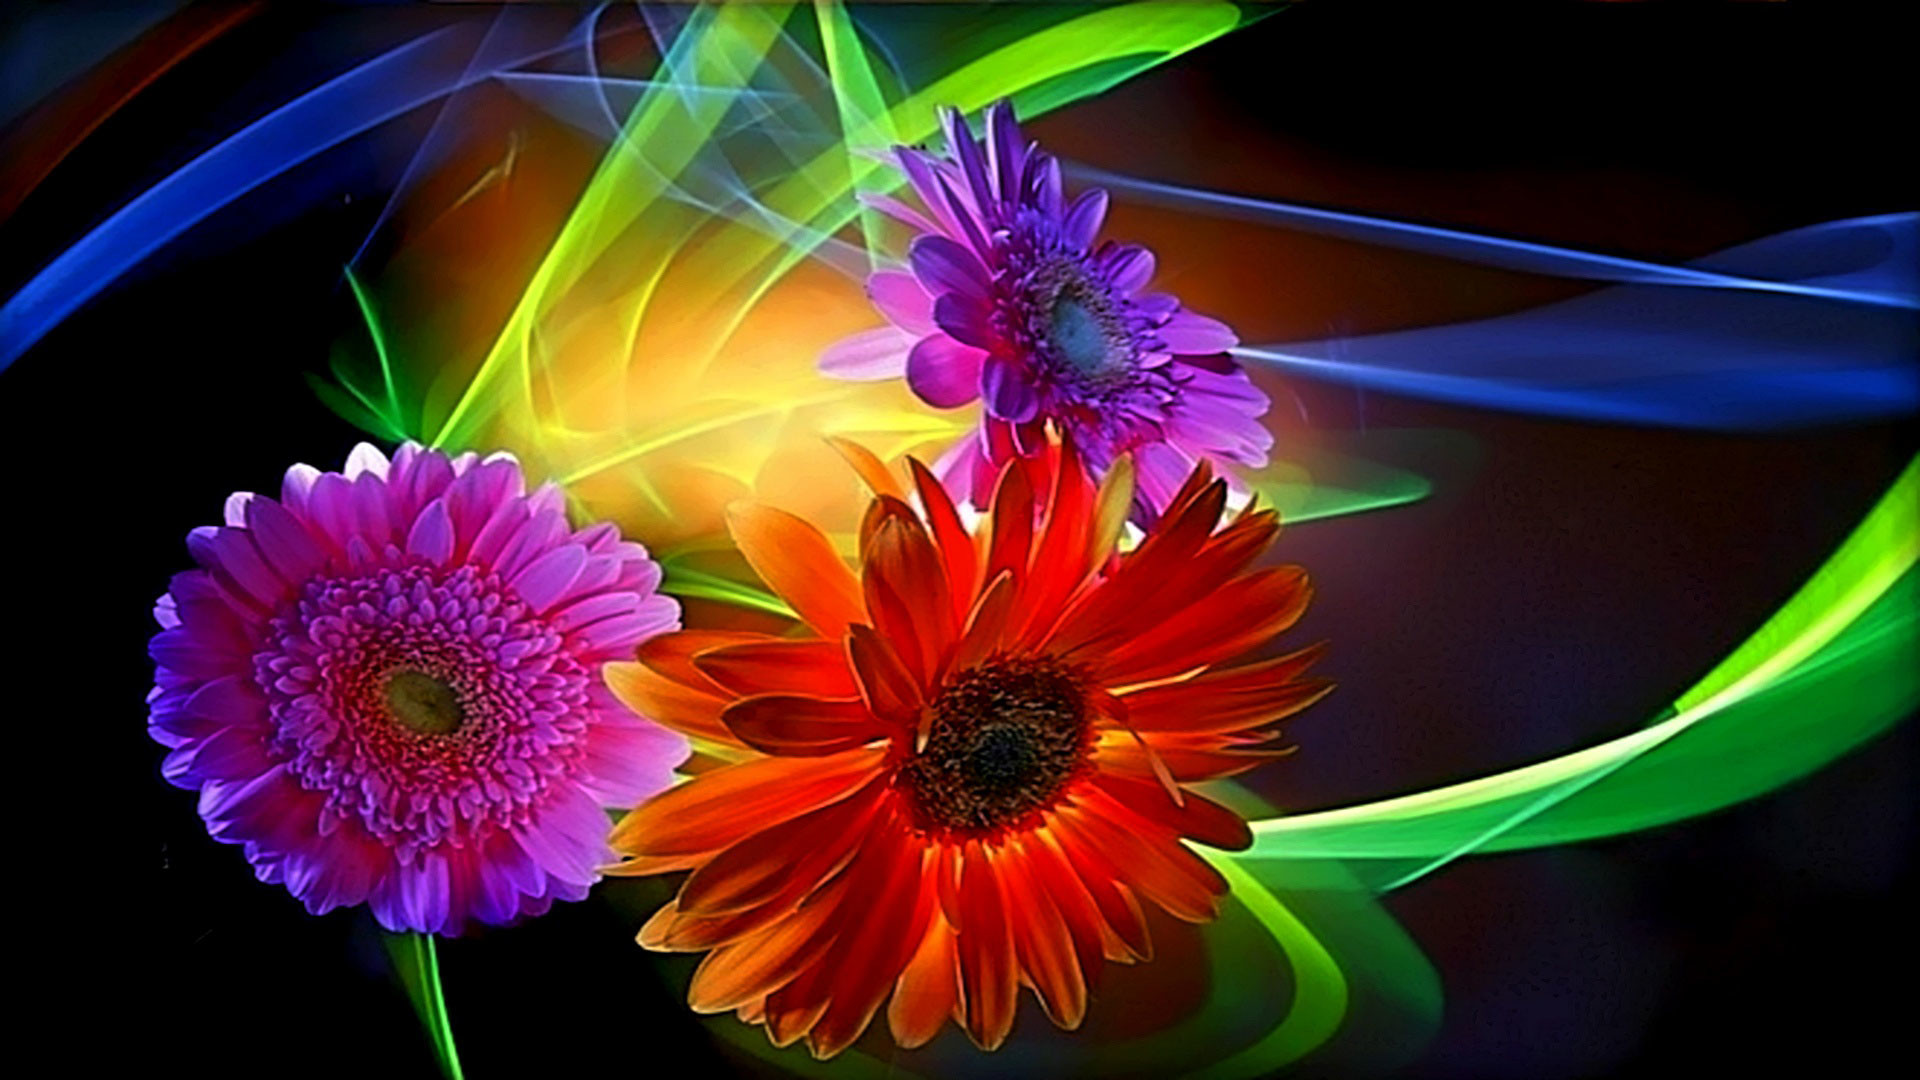 1920x1080 Flowers Live Wallpaper - Android Apps on Google Play